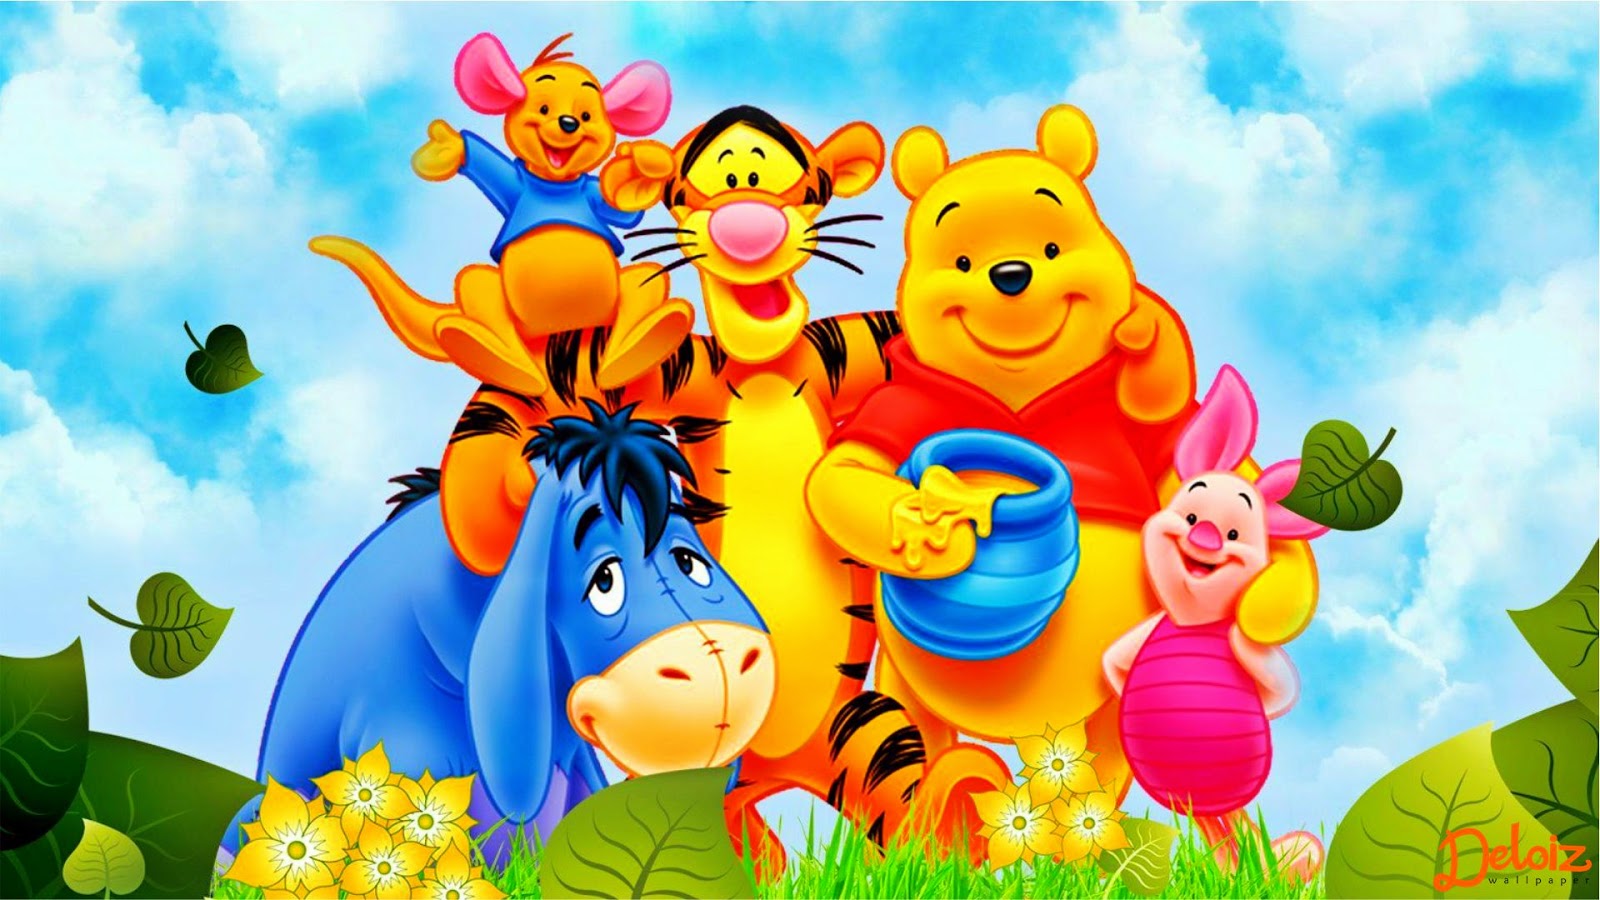 WALLPAPER ANDROID IPHONE Wallpaper Winnie  The Pooh  HD